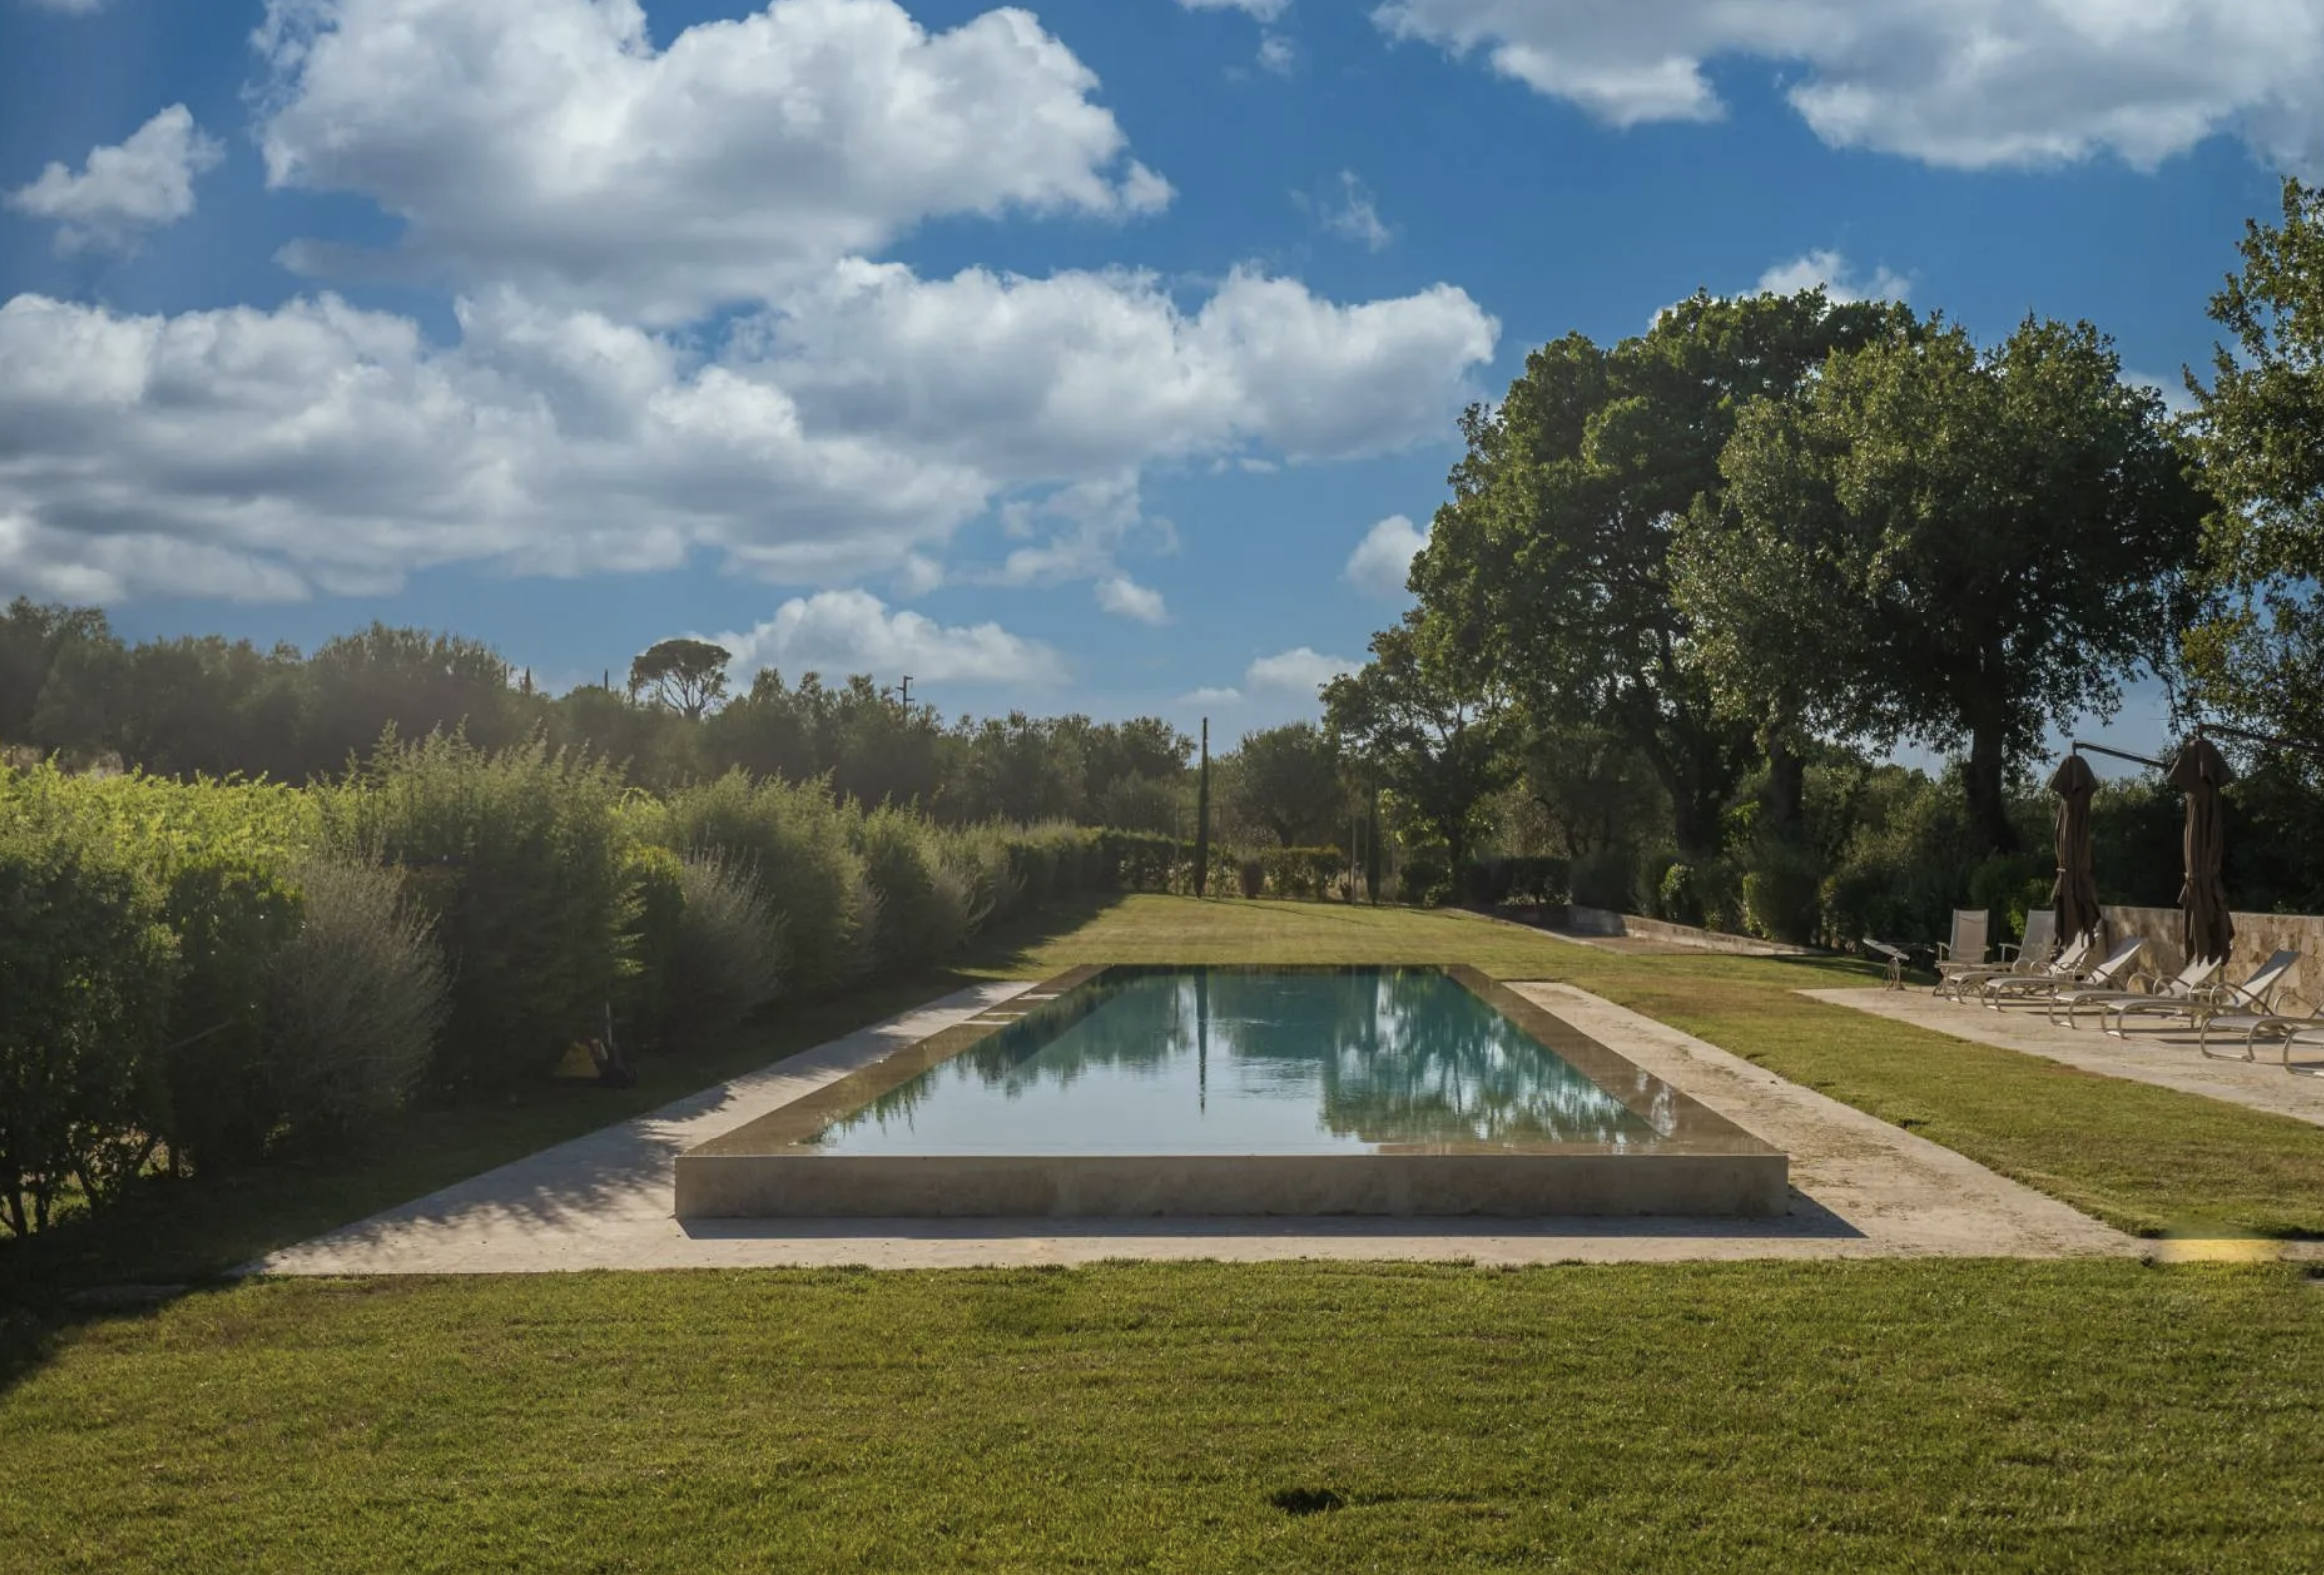 Francis York Villa Travertino: Luxury Villa and Wine Estate in the Heart of Tuscany 16.png